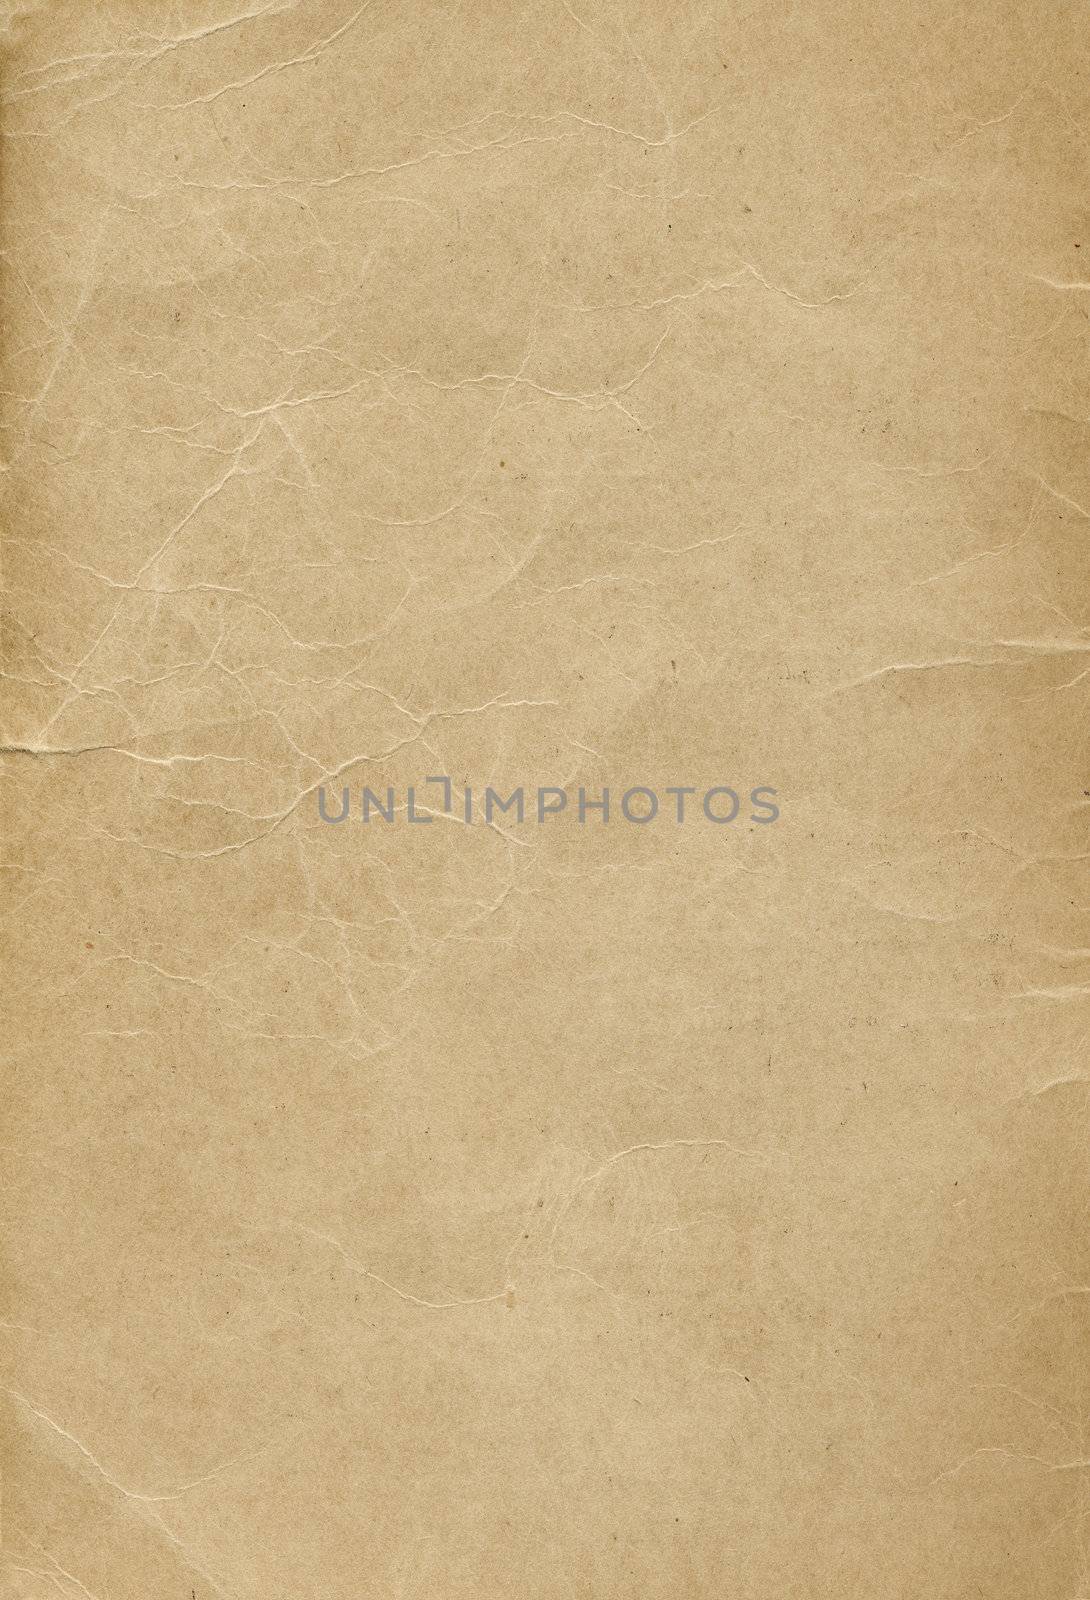 Background texture of old brown and wrinkled paper